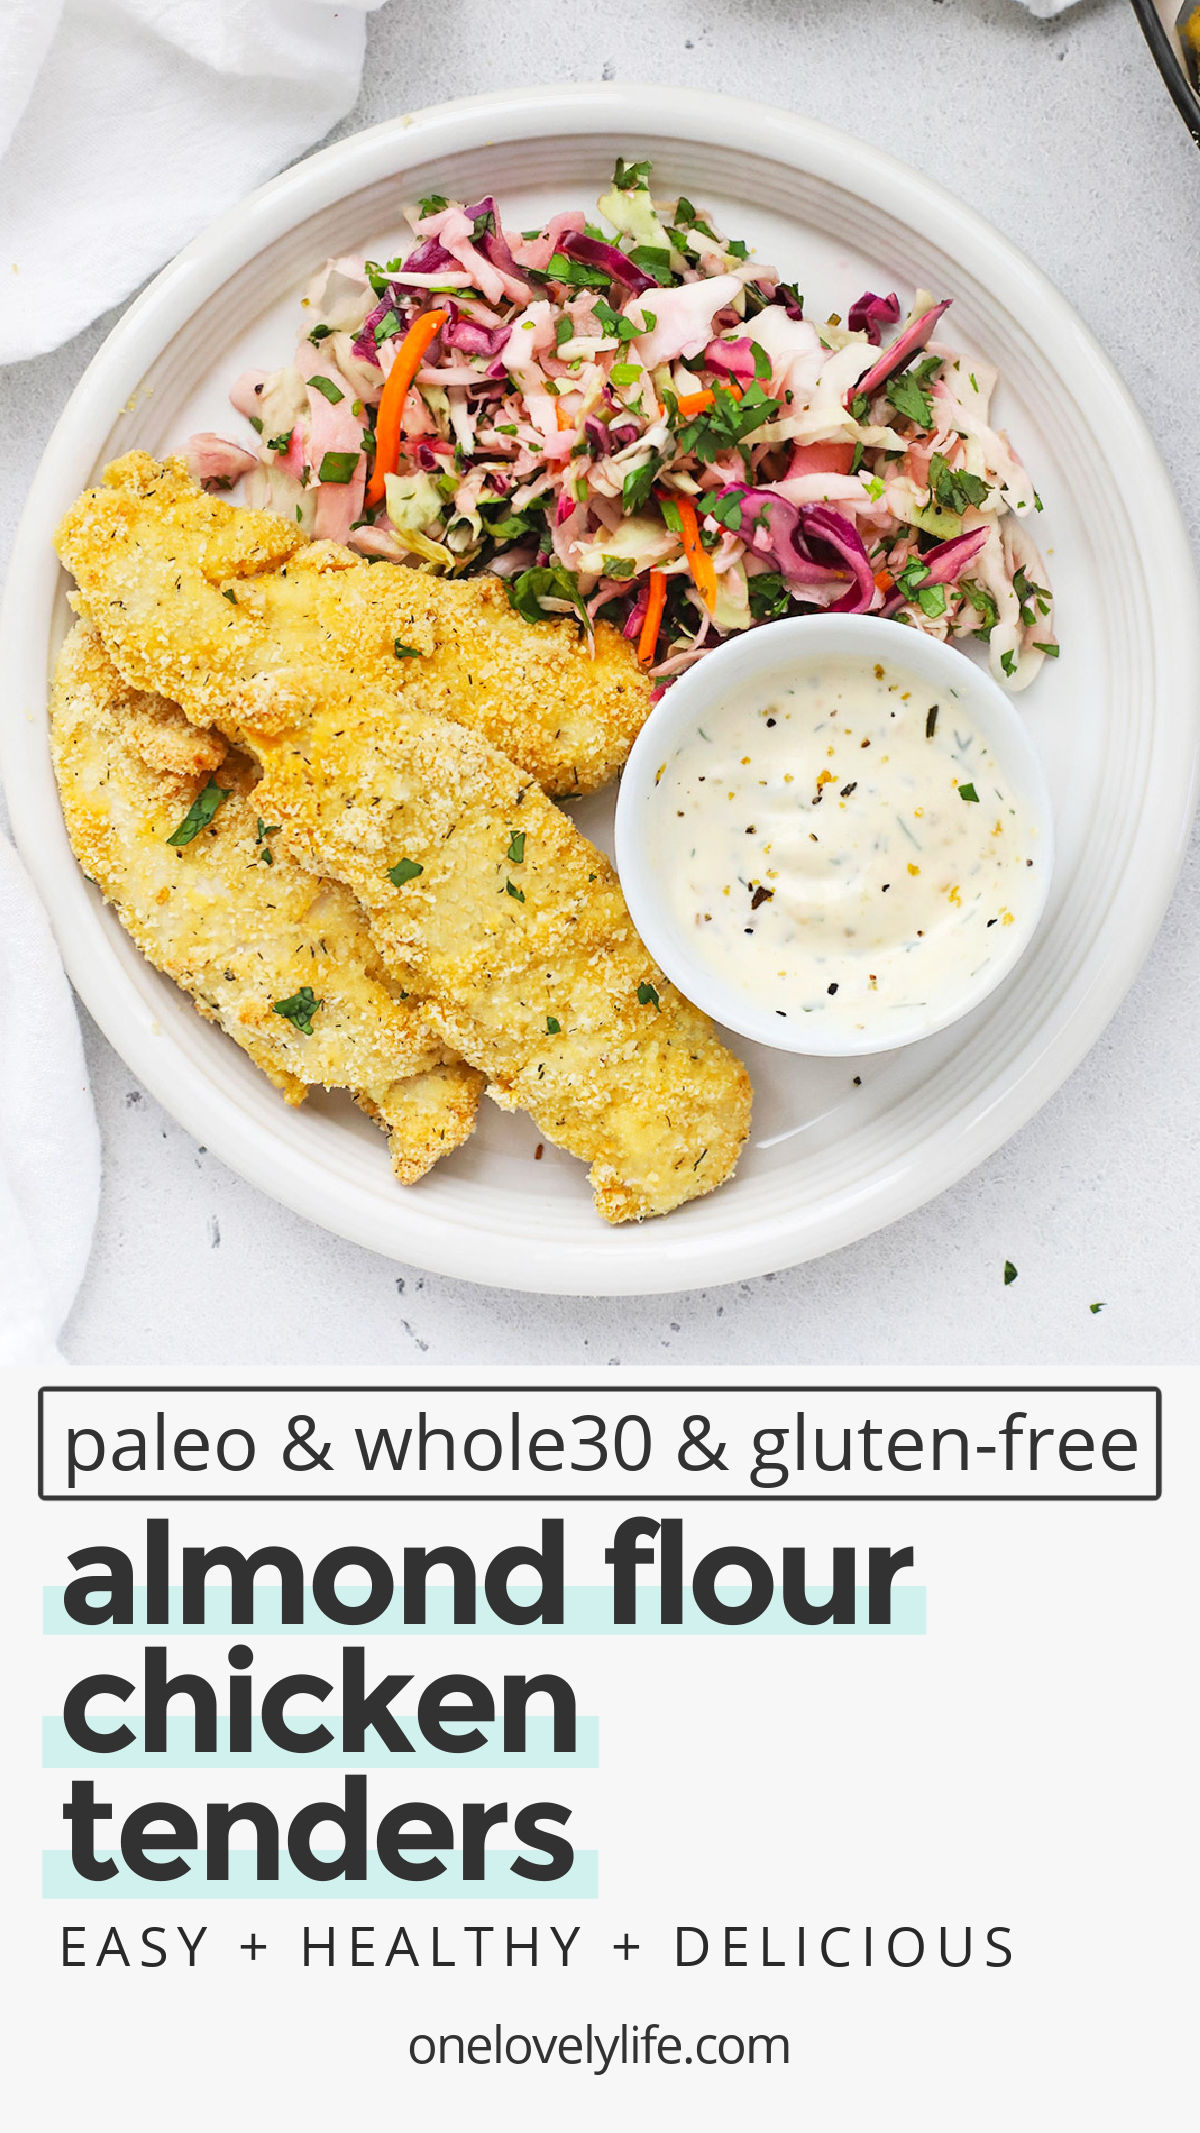 Almond Flour Chicken Tenders - These healthy chicken tenders are breaded with seasoned almond flour and cooked to perfection. Enjoy them on their own, or try them with one of our dipping sauces below! (Paleo, Whole30, Gluten-Free) // Paleo Chicken Tenders // Whole30 Chicken Tenders // Crispy Chicken Tenders // Gluten Free Chicken Tenders // Paleo dinner // Whole30 dinner